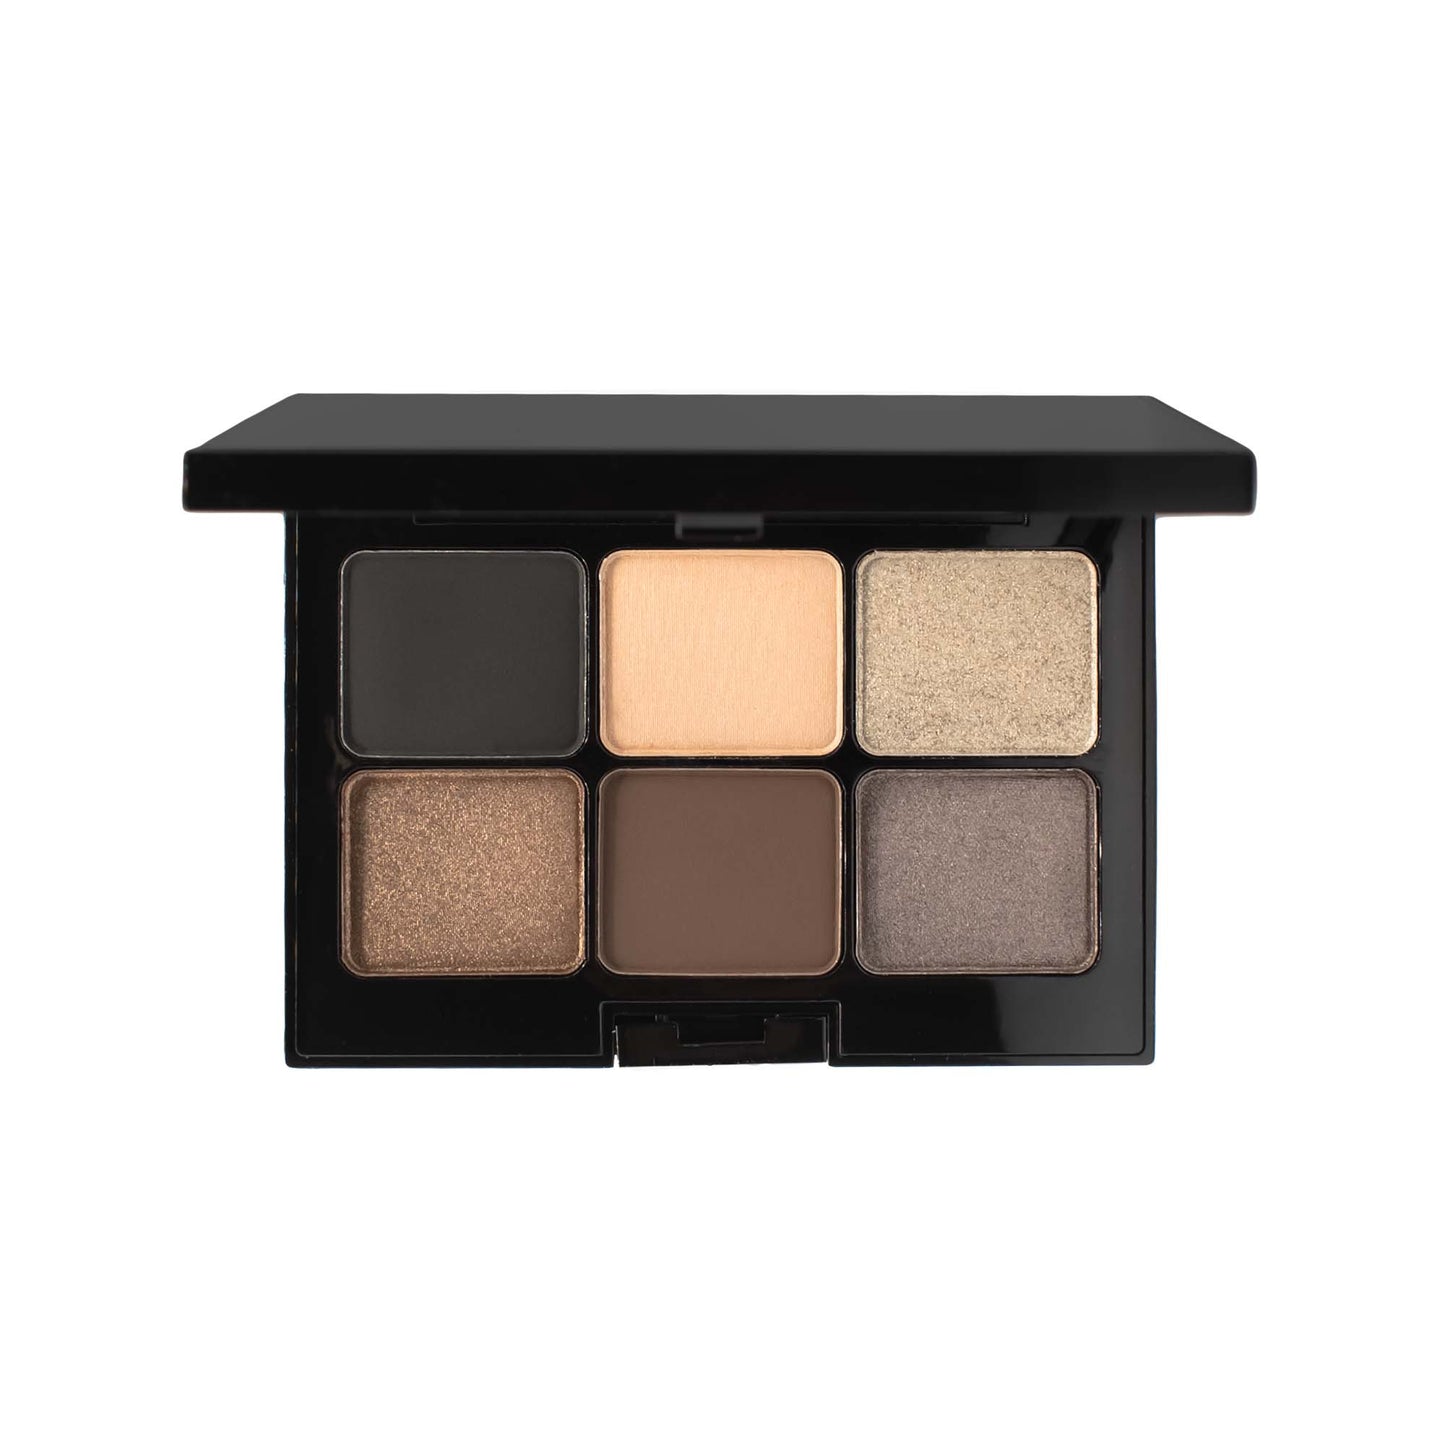 The Spiced Sunset Eye Shadow Palette by Cruisin Organics is online. easily combined mix-and-match color finishes that go through while giving off an illuminating, sumptuous appearance. Applying it carefully and lovingly protects the fragile region around the eyes.